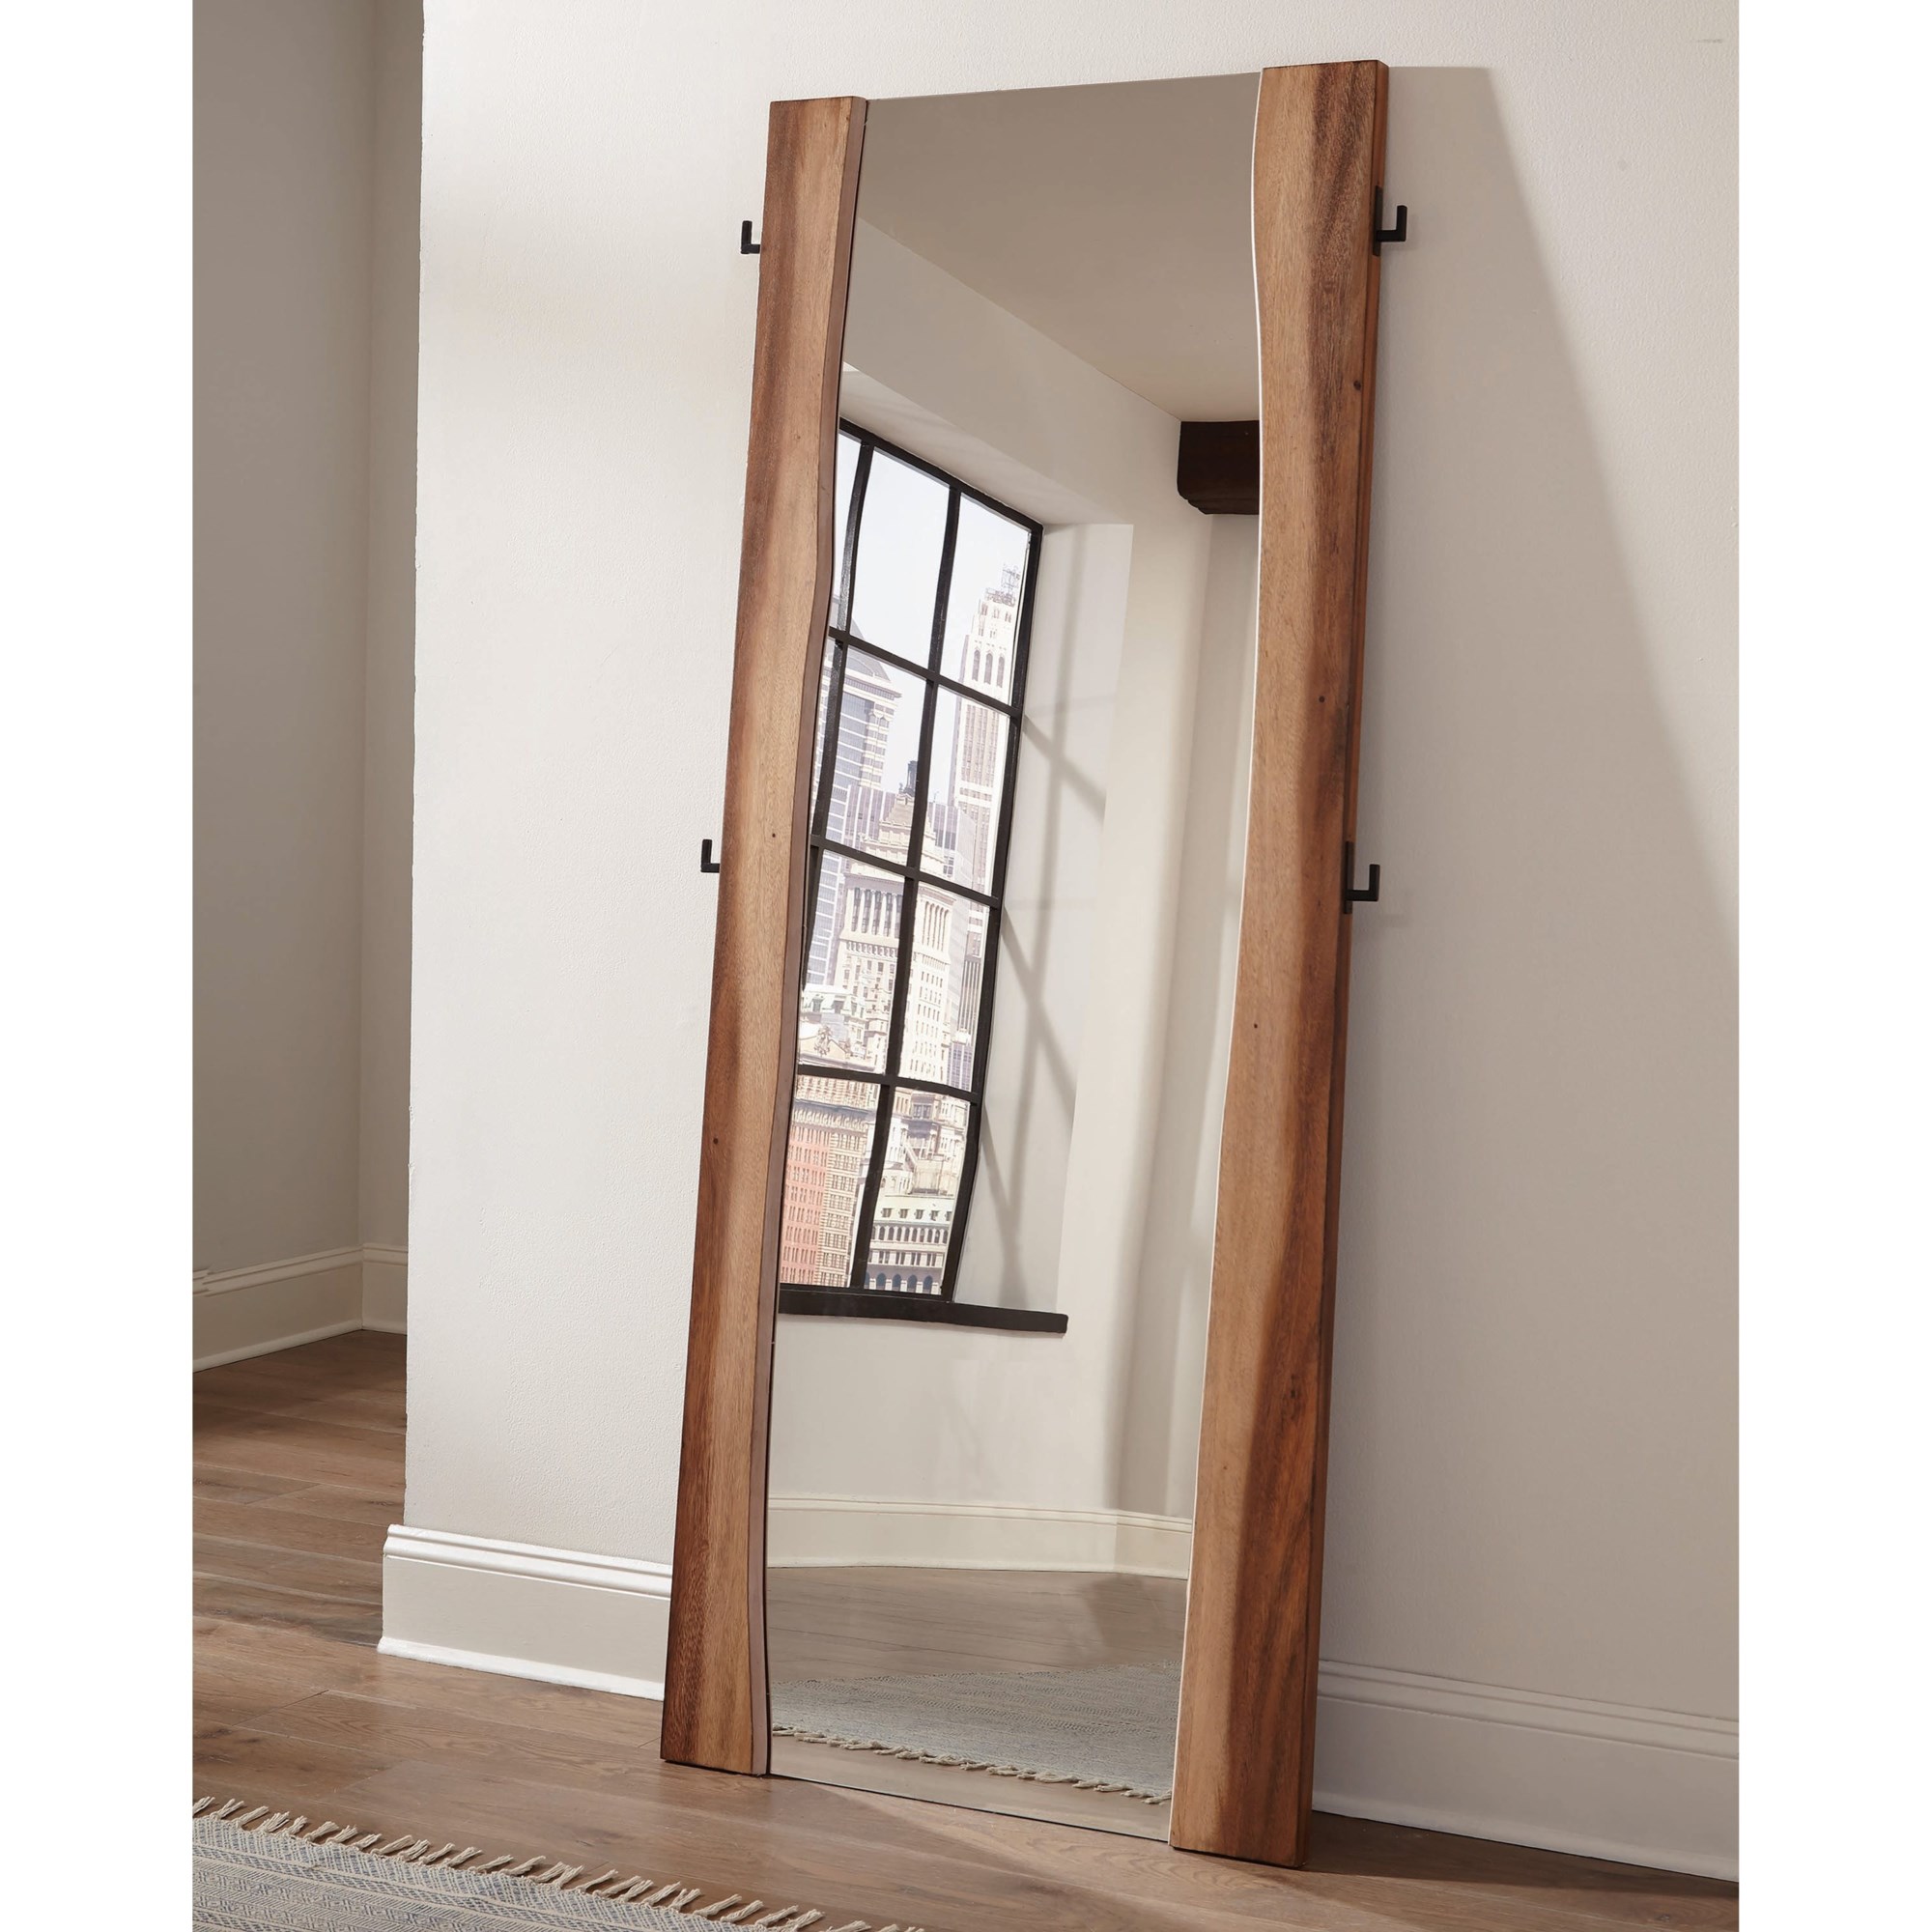 Coaster Winslow 223256 Rustic Full Length Standing Mirror with Coat Hooks, Arwood's Furniture